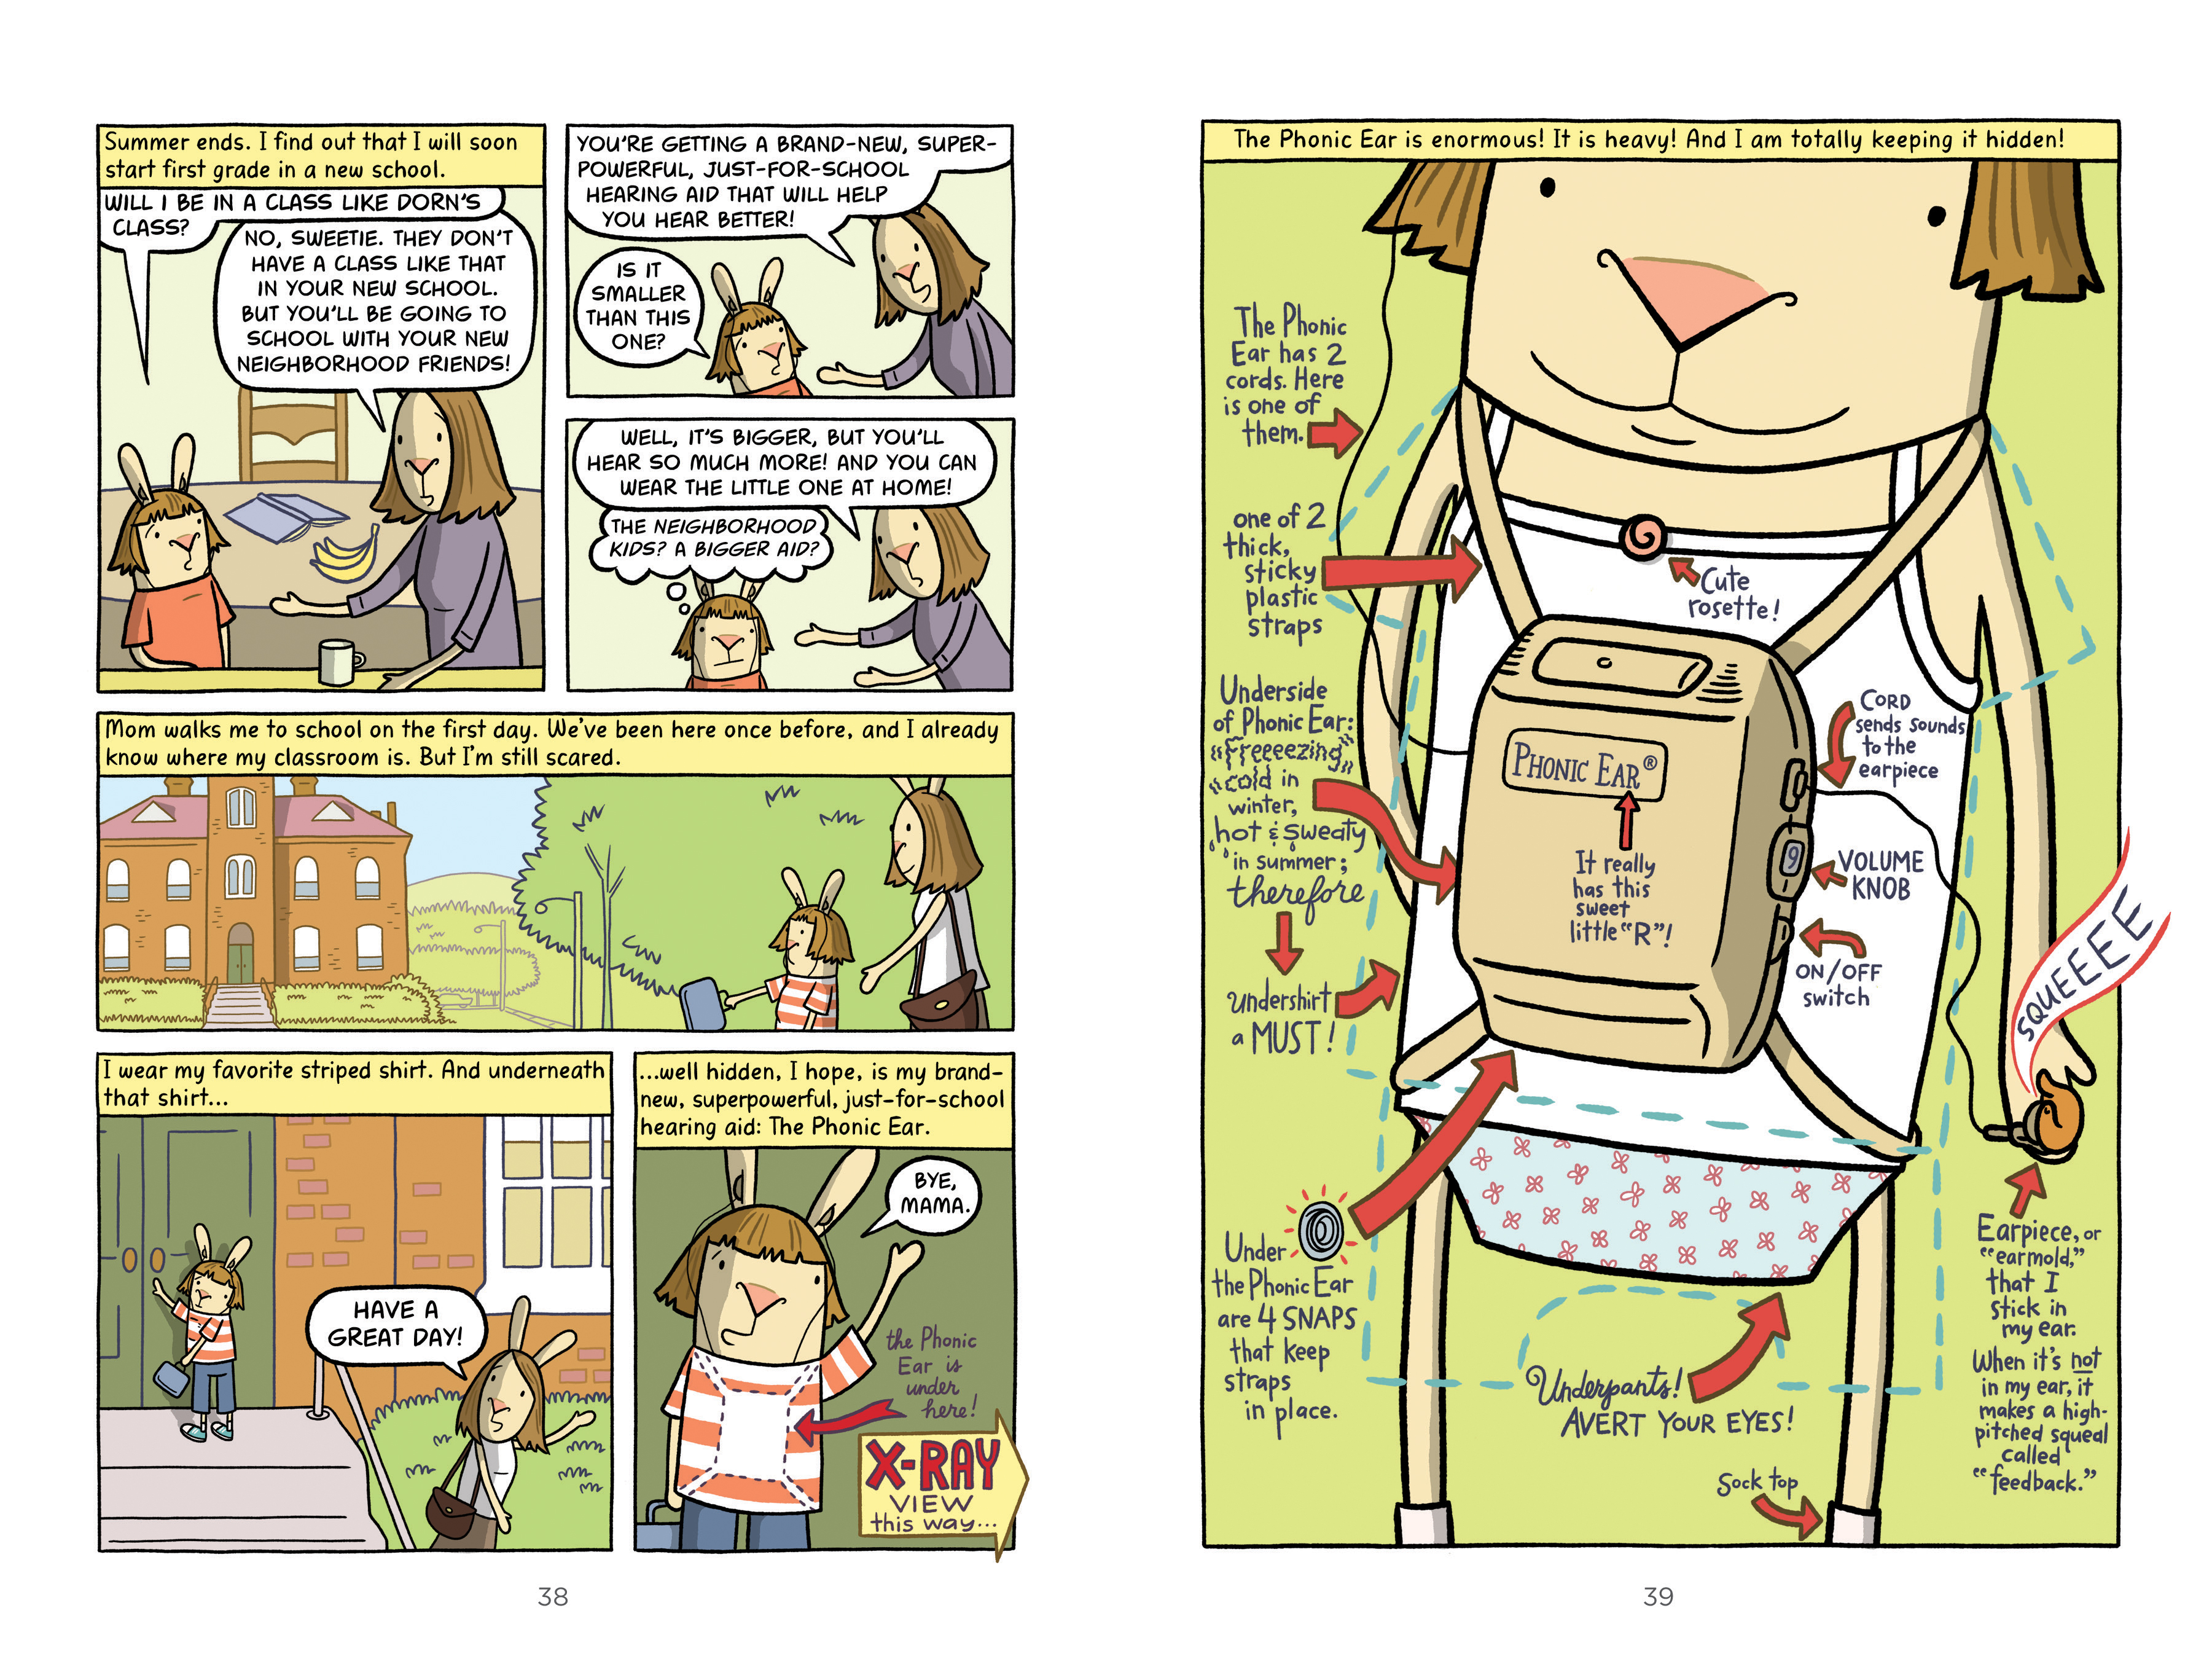 Sample page from El Deafo. Click image to view larger.